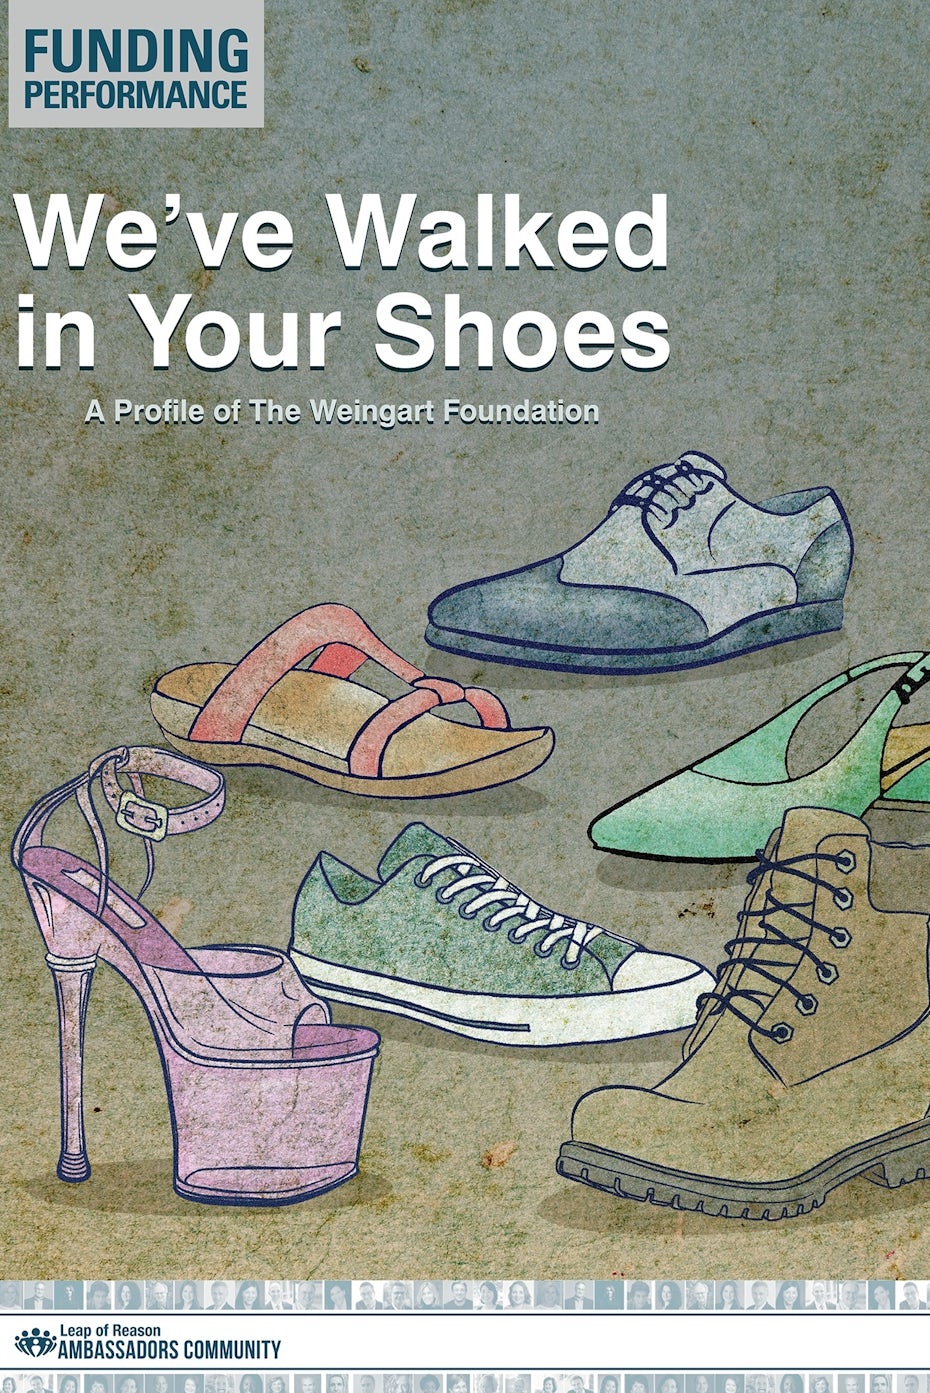 Shoe-themed magazine cover